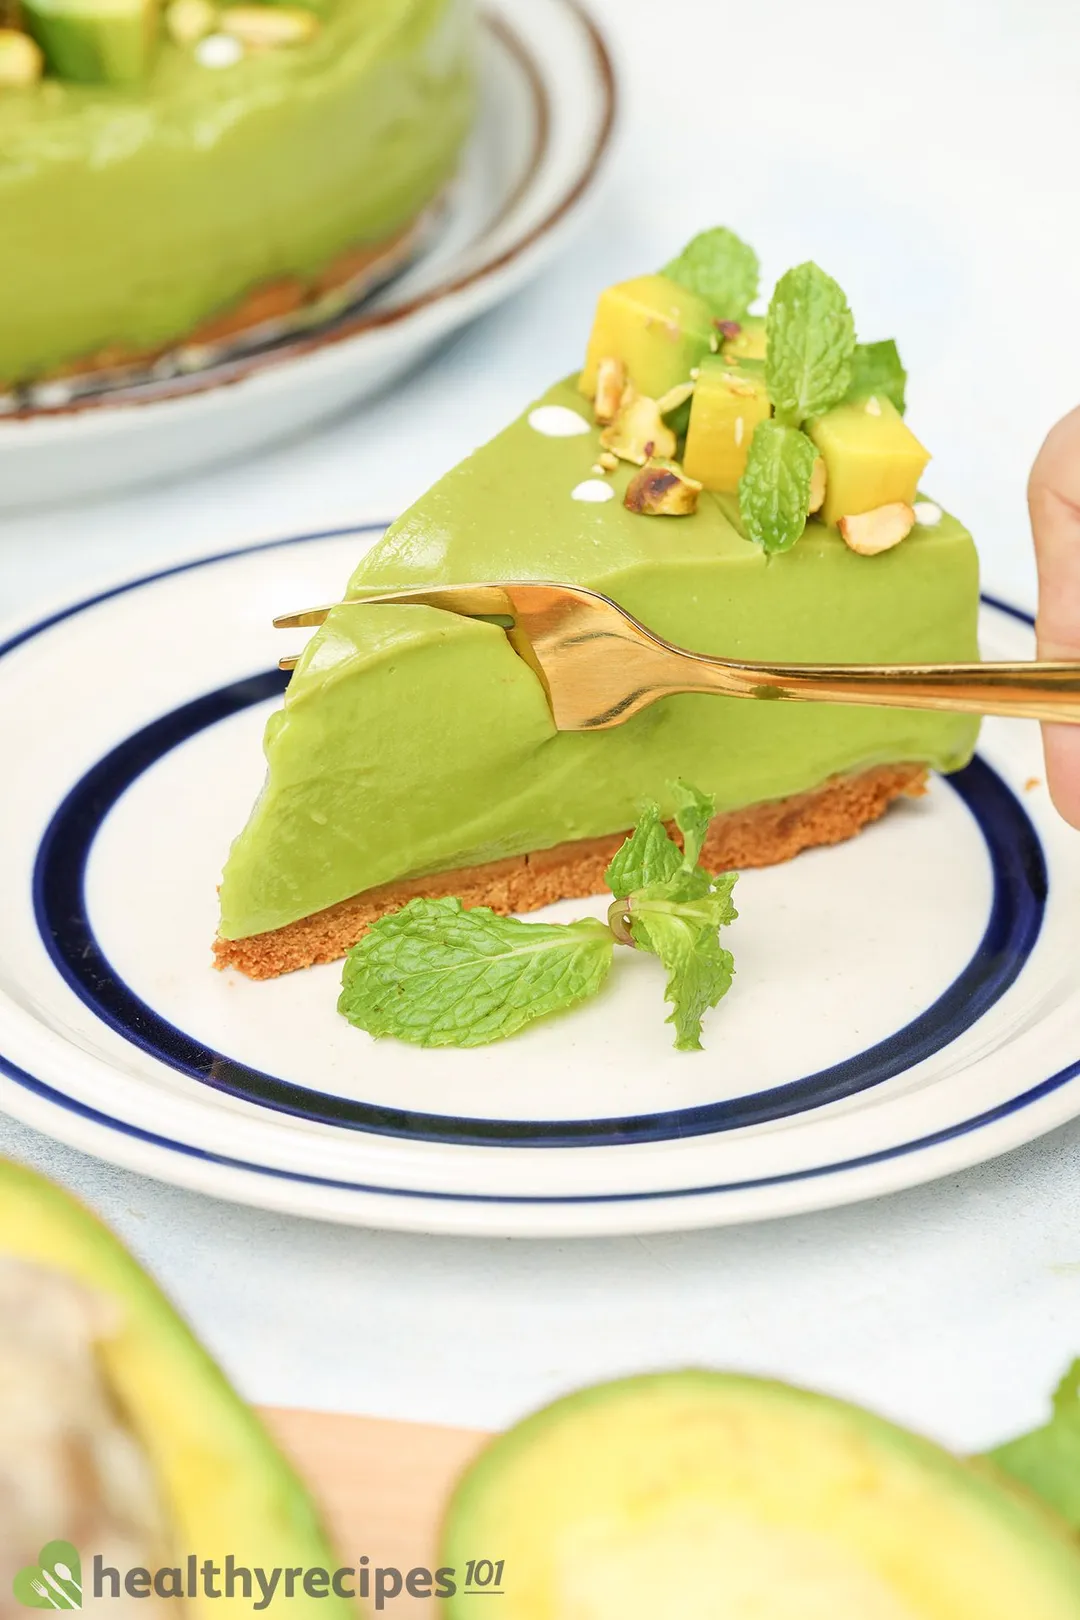 A golden fork cutting into a slice of avocado cheesecake garnished with green mints and avocado cubes